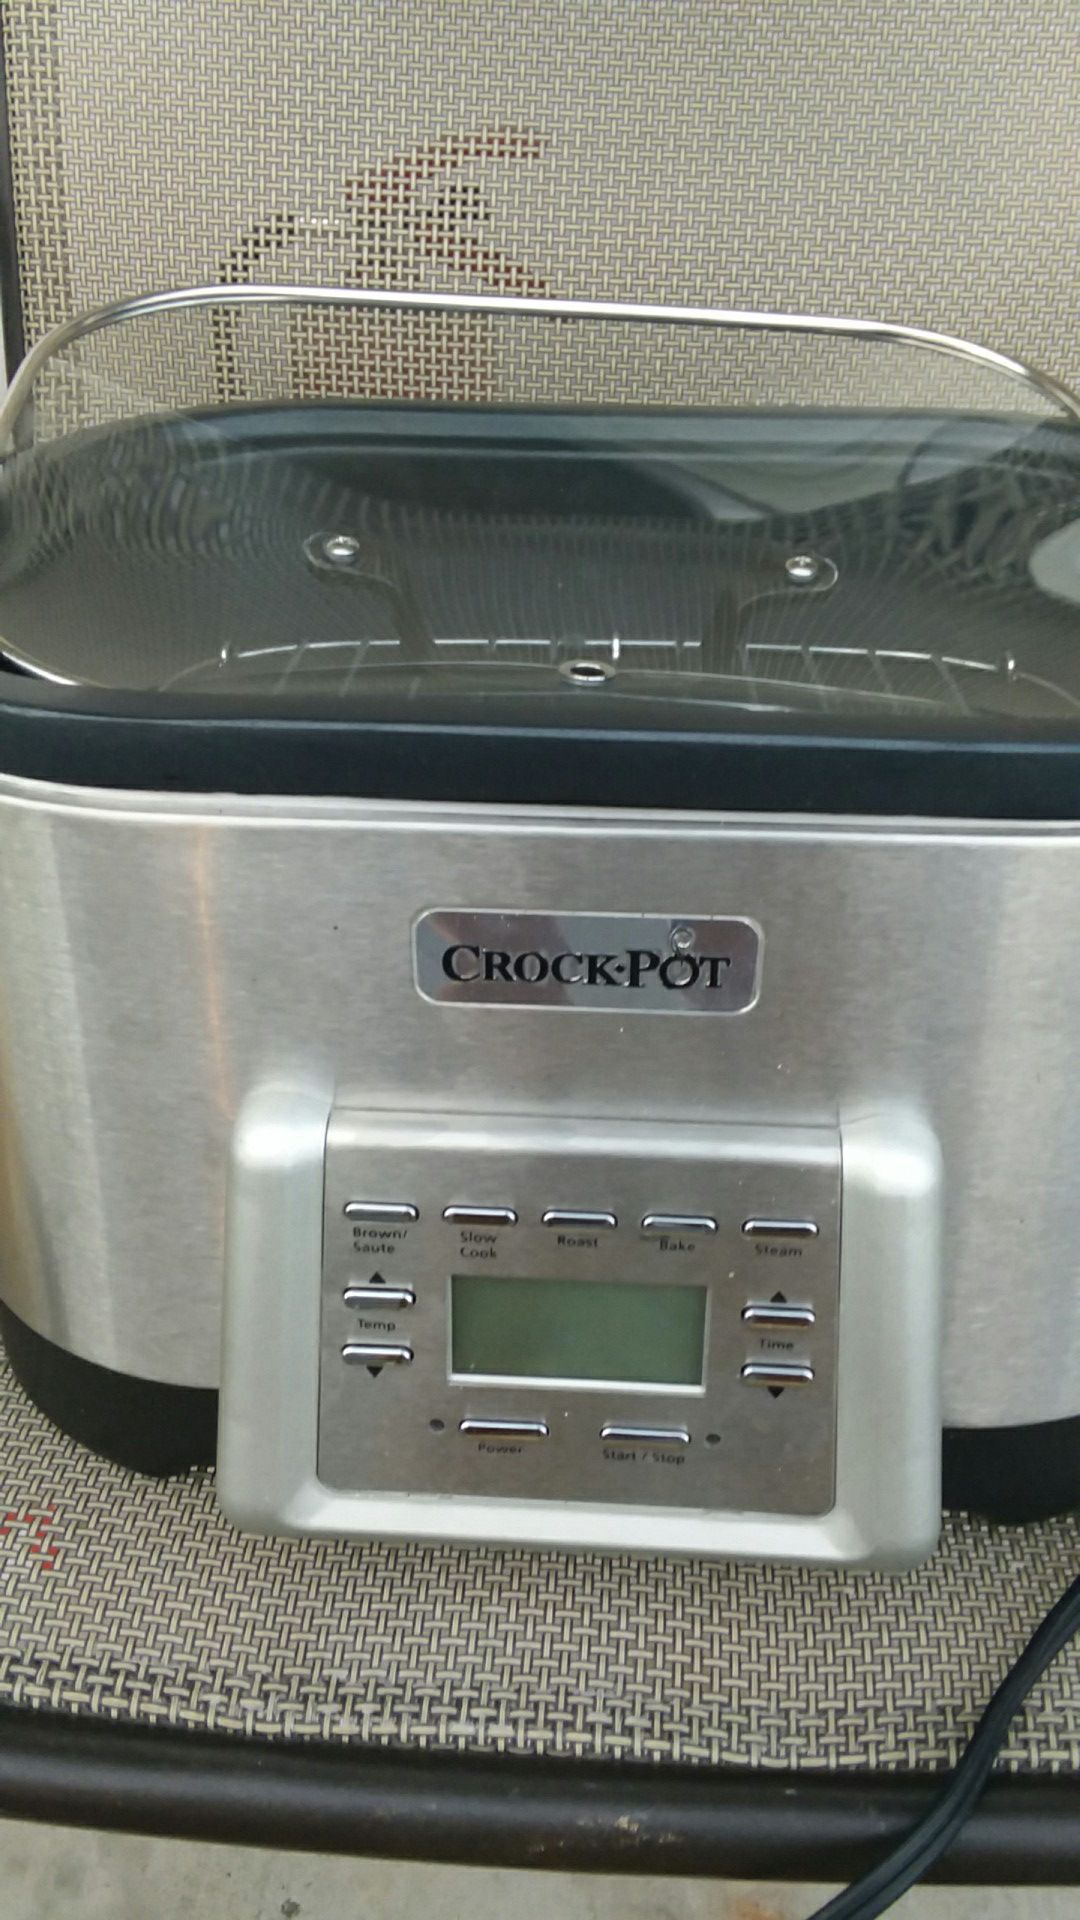 This is the ultimate crock pot